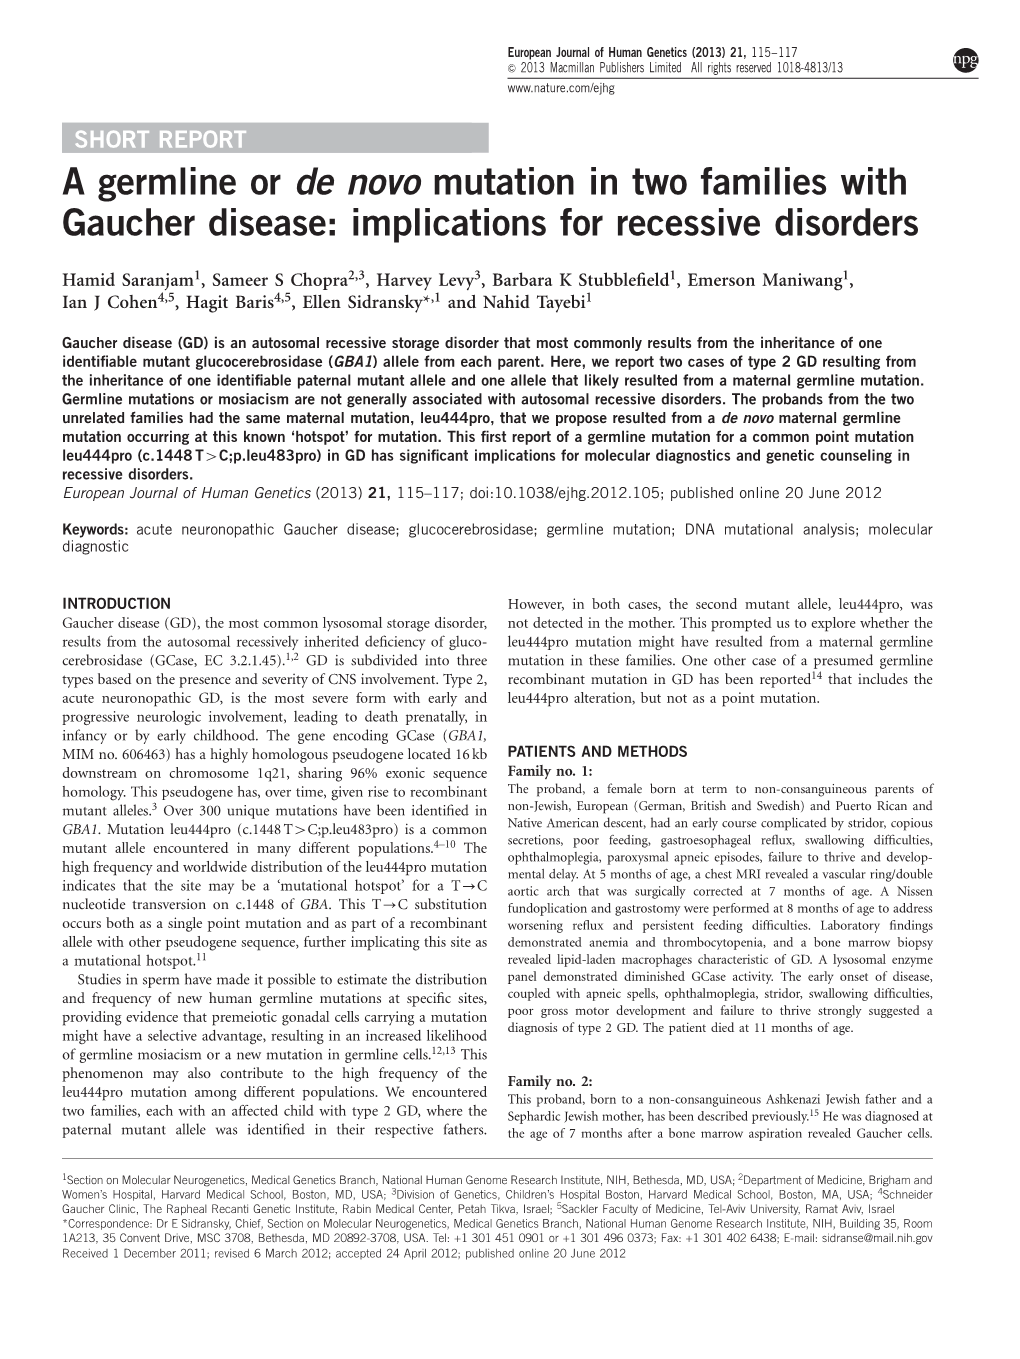 A Germline Or De Novo Mutation in Two Families with Gaucher Disease: Implications for Recessive Disorders